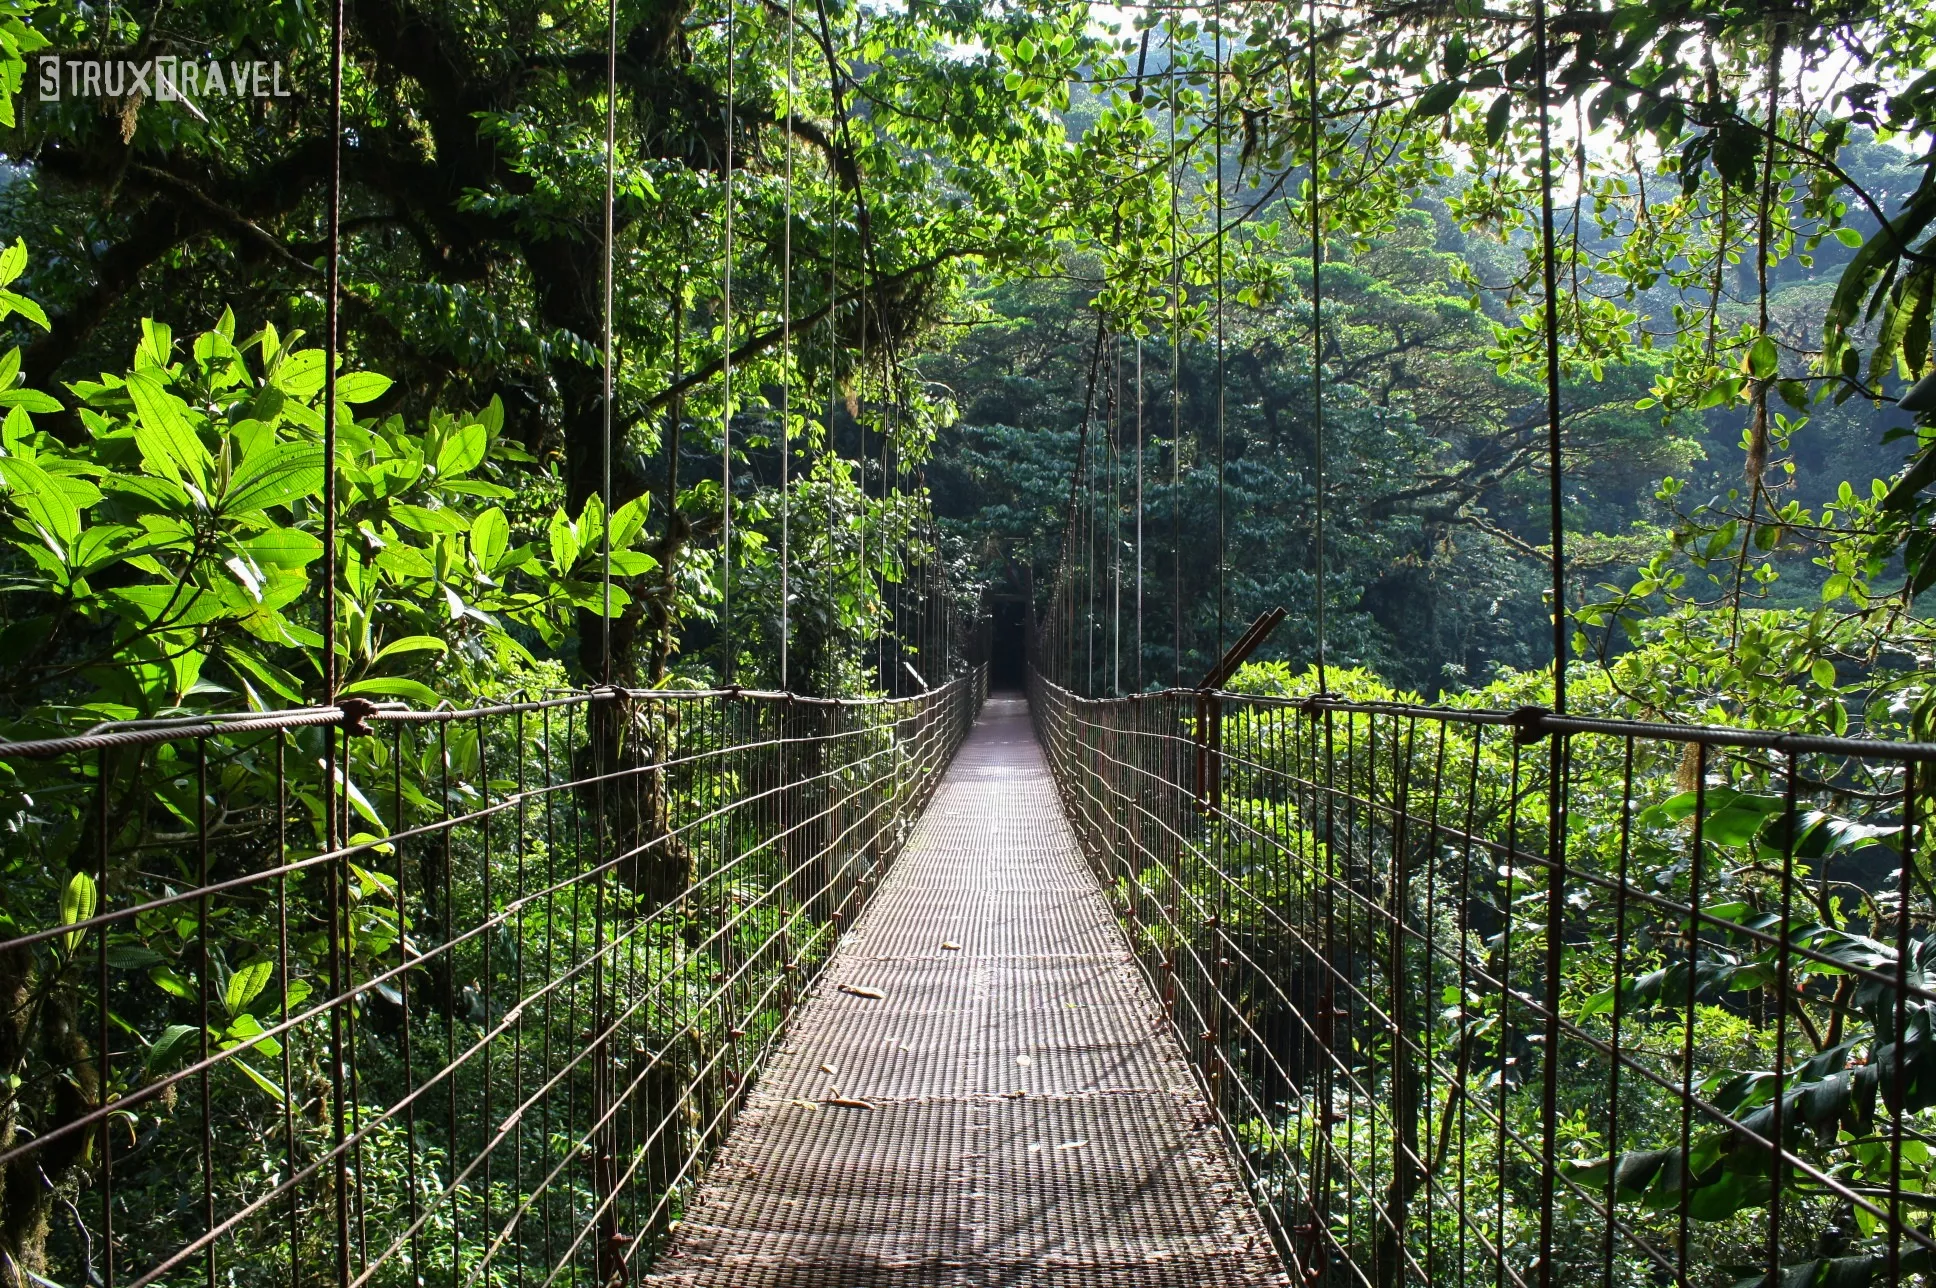 Monteverde Cloud Forest Reserve Hike in Costa Rica, North America | Trekking & Hiking - Rated 3.8